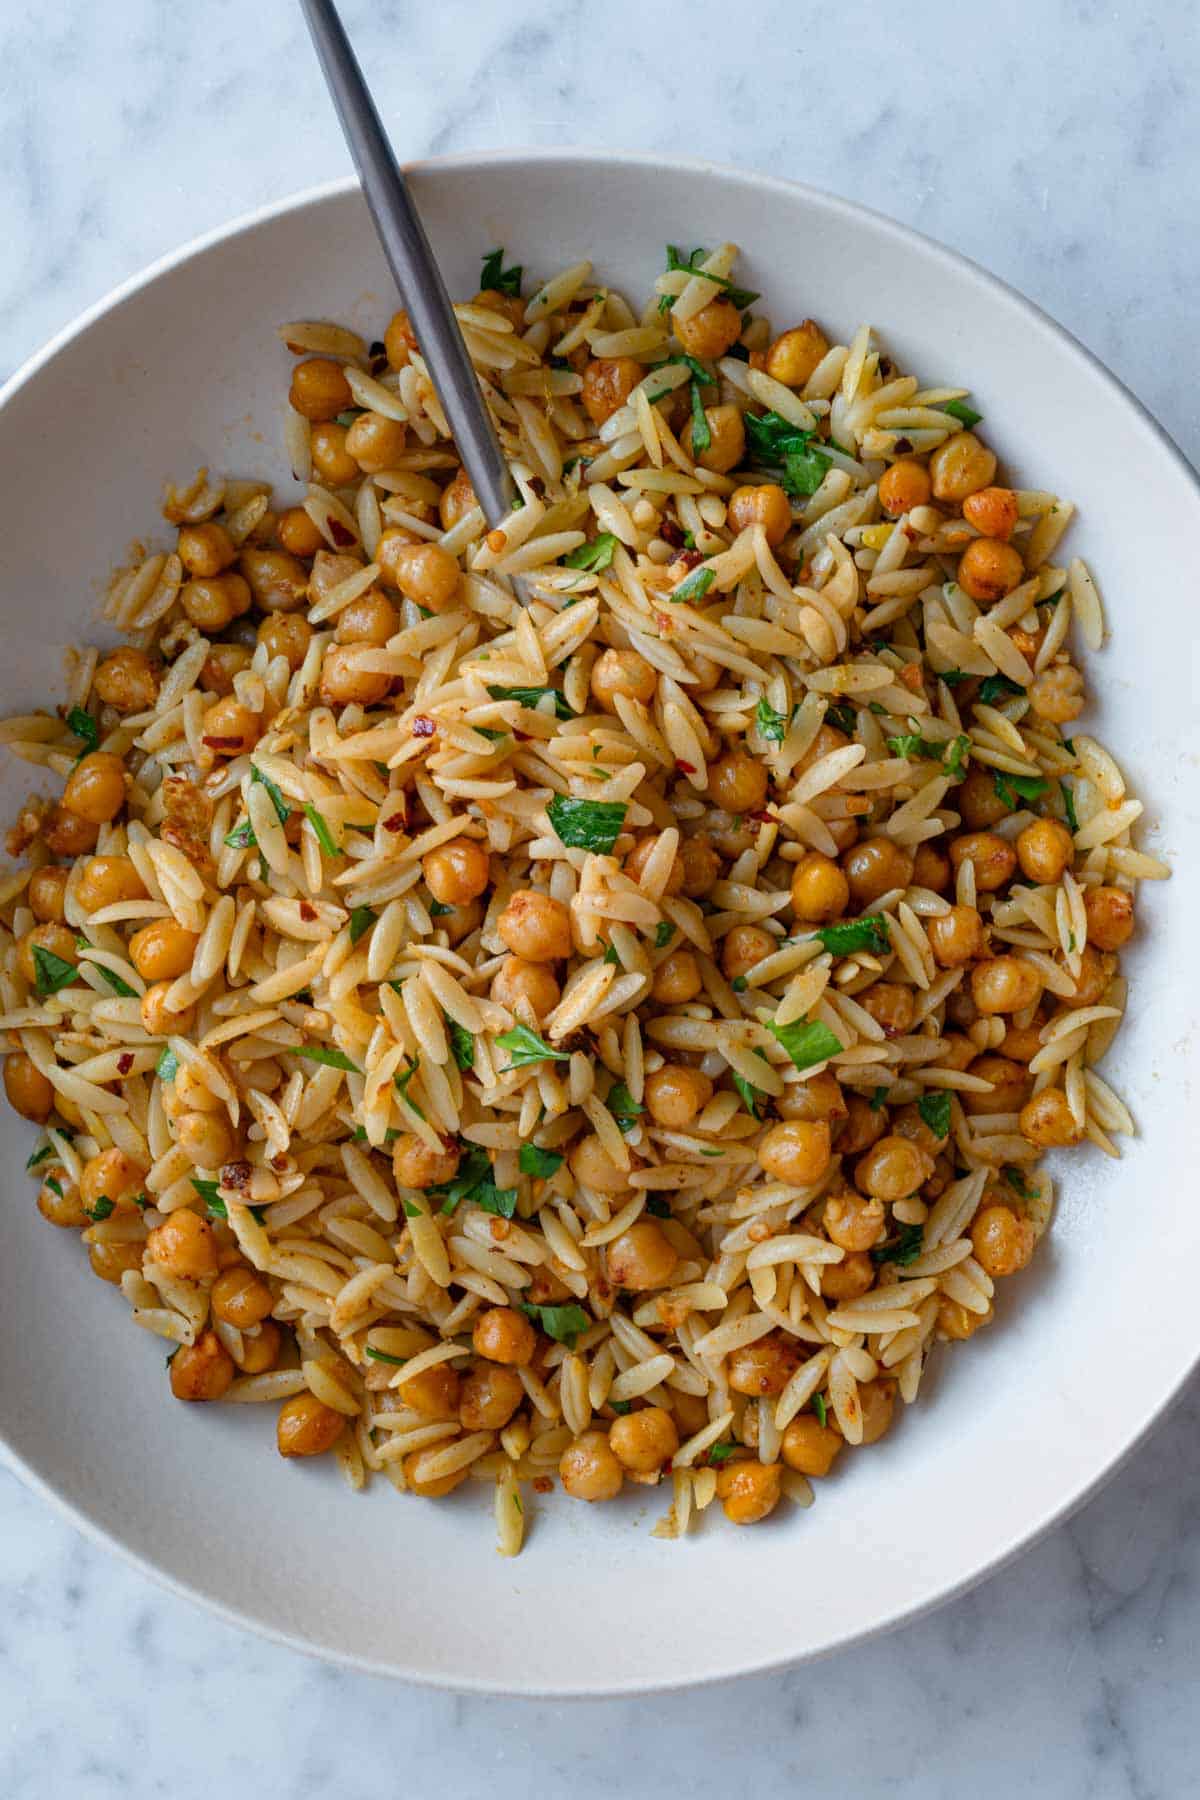 Orzo pasta with roasted chickpeas, chopped parsley, crushed red pepper and lemon zest in a white bowl, with a silver fork.